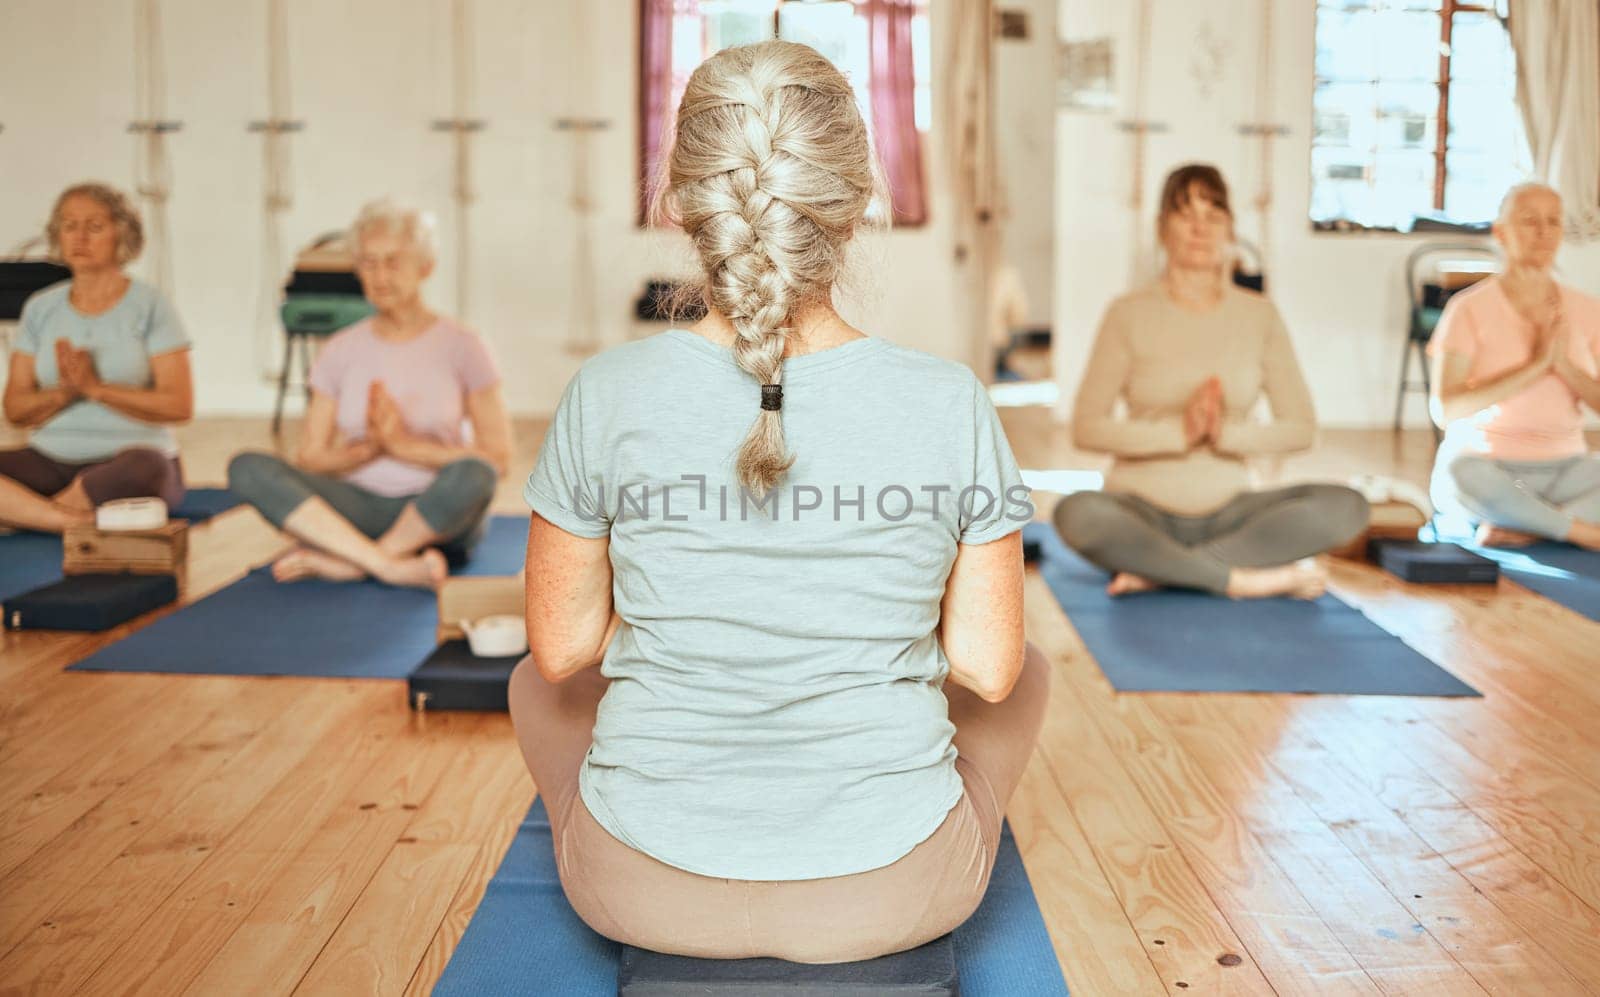 Yoga, personal trainer and senior women group for meditation, wellness and spiritual lifestyle with support, community and retirement. Fitness, pilates and cardio elderly people meditate with coach.